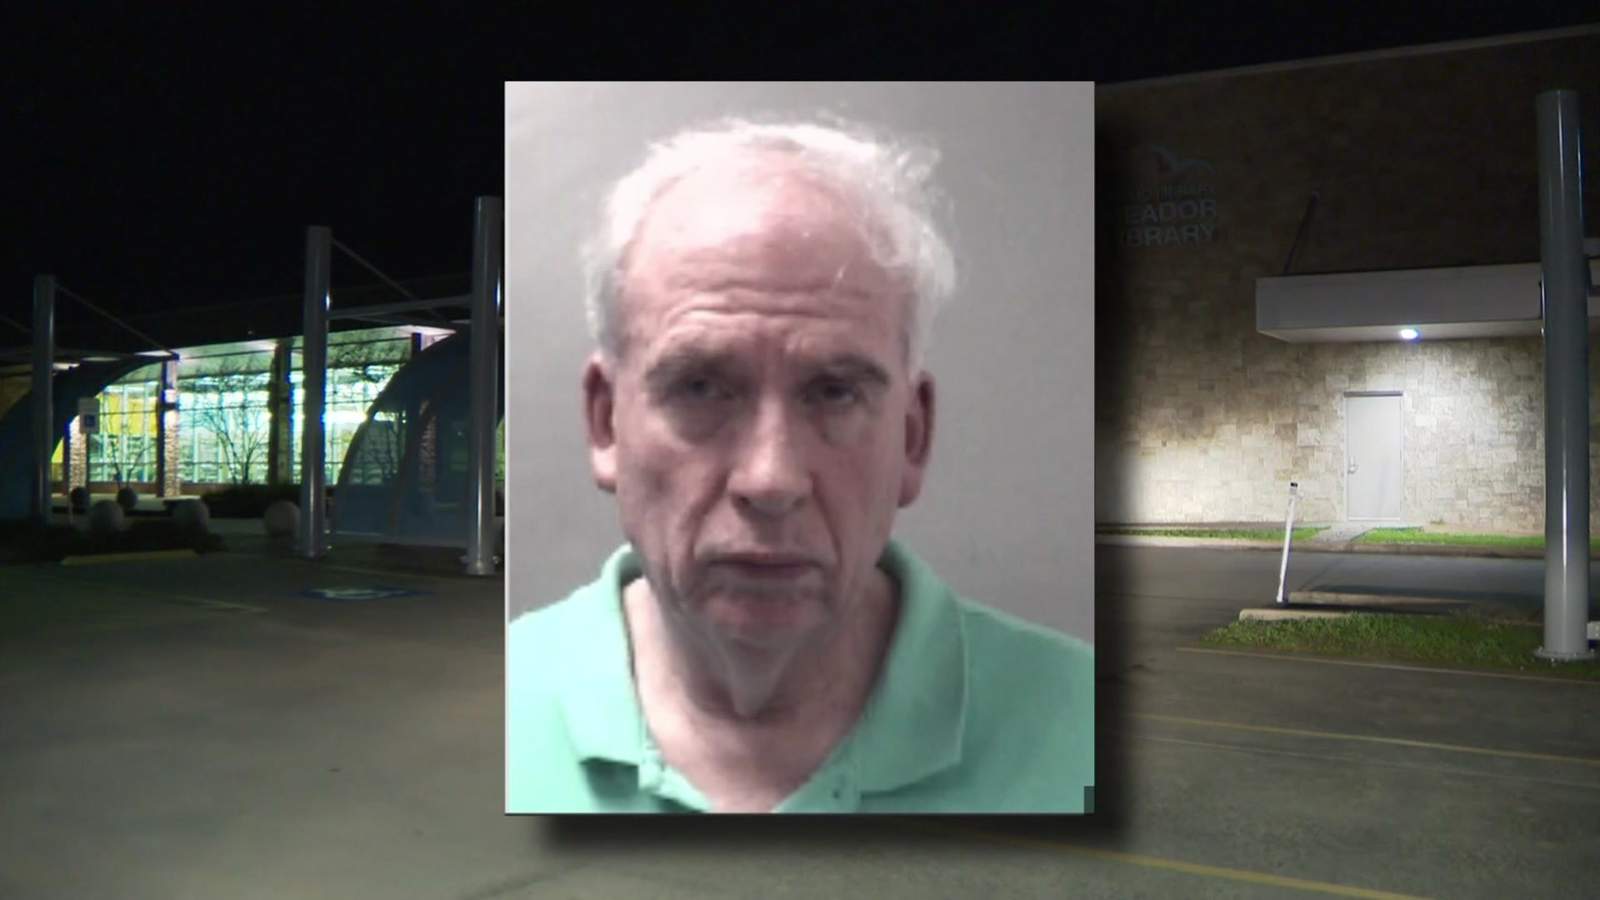 73-year-old man accused of exposing himself to children at Houston-area library